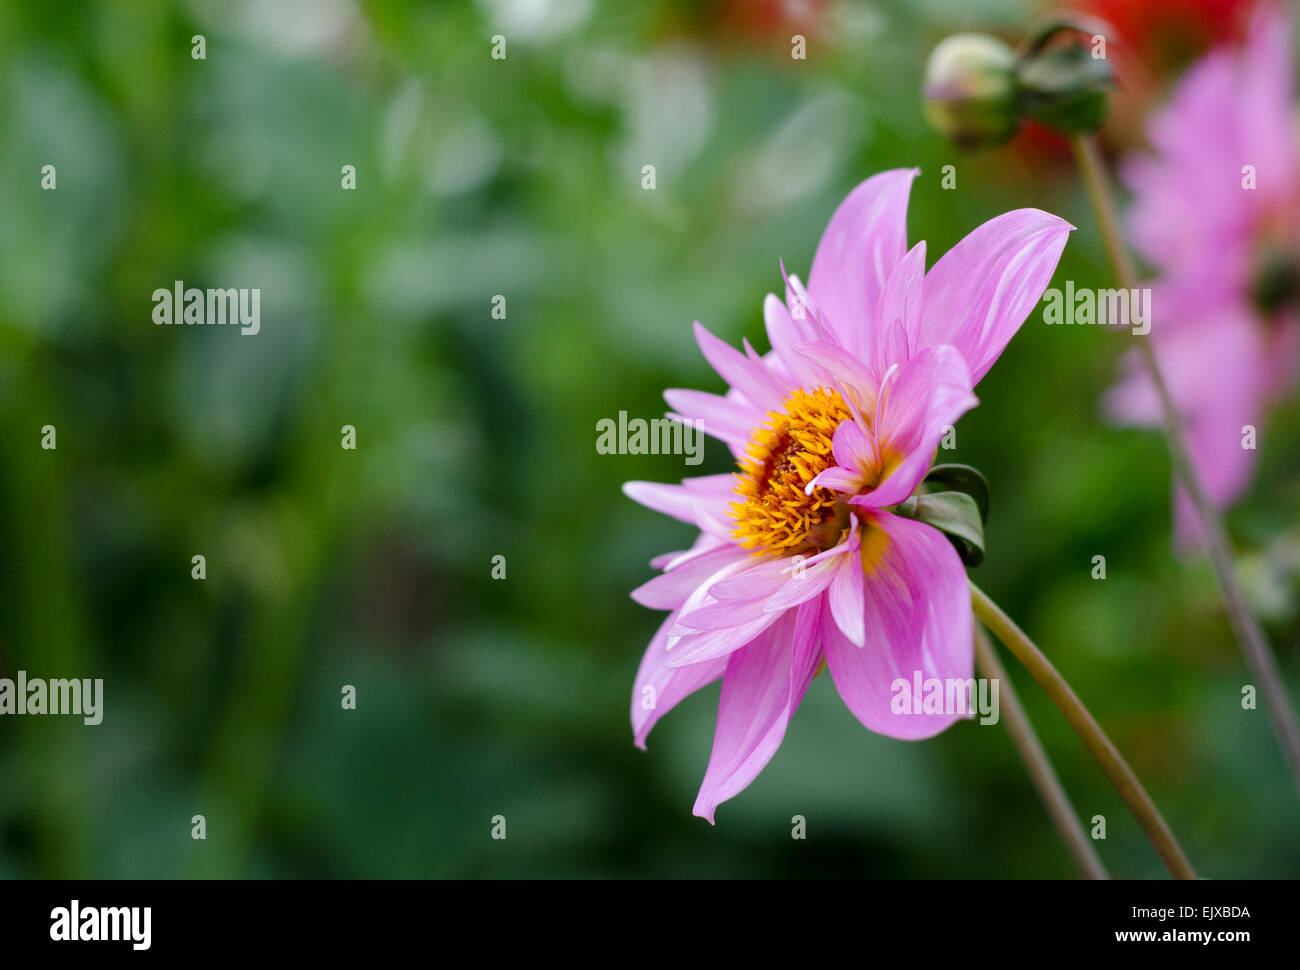 A pink anenome with a yellow centre growing outdoors Stock Photo